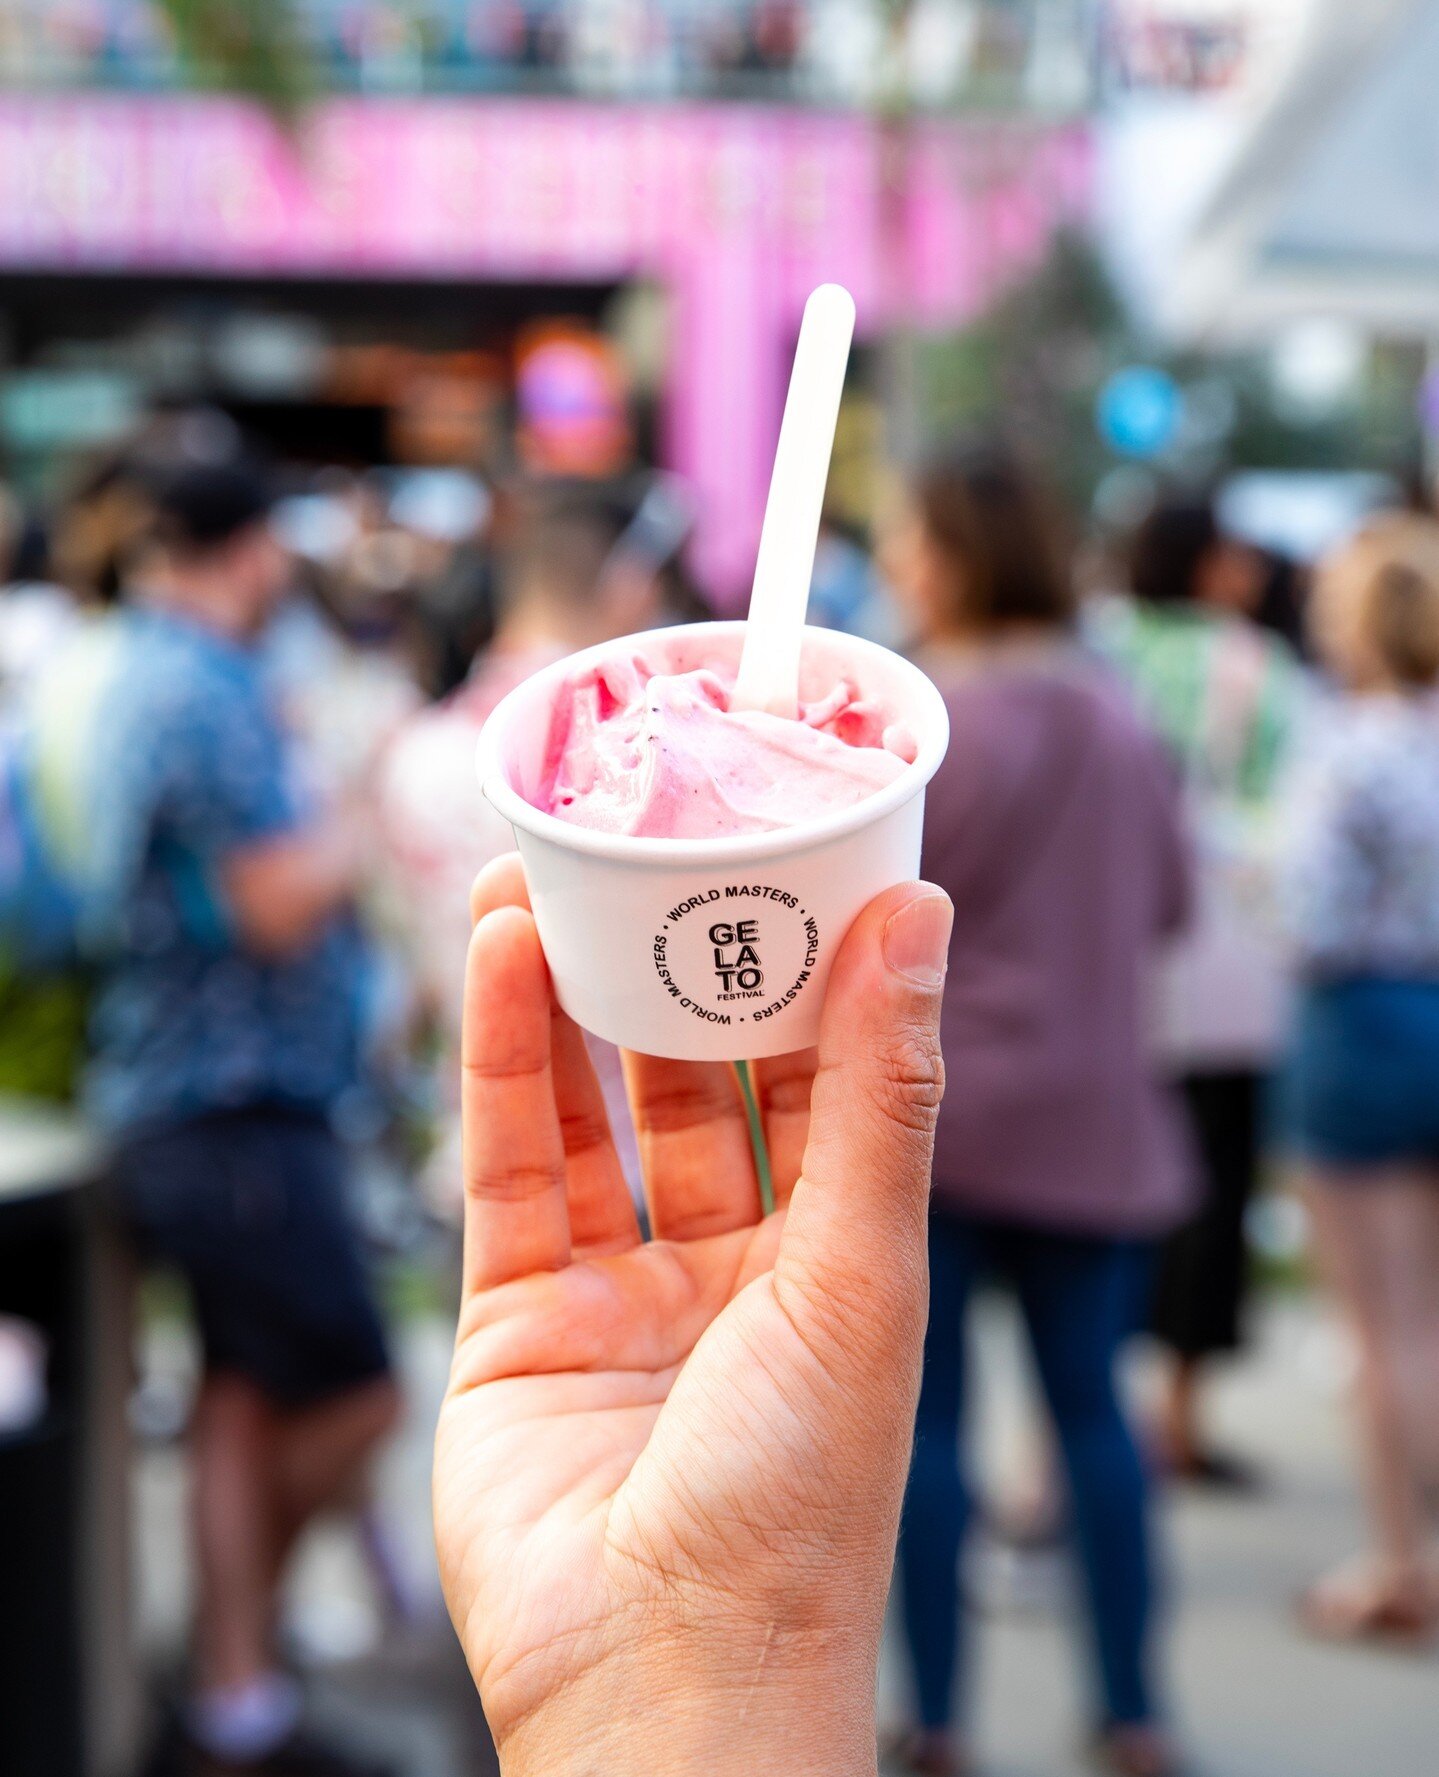 Thank you for coming to the @gelatofestivalworldmasters! We had a flavorful weekend full of tasting world class gelato flavors from the best makers in North America. For info on more of our food-themed events, be sure to visit the link in our bio! 🍨